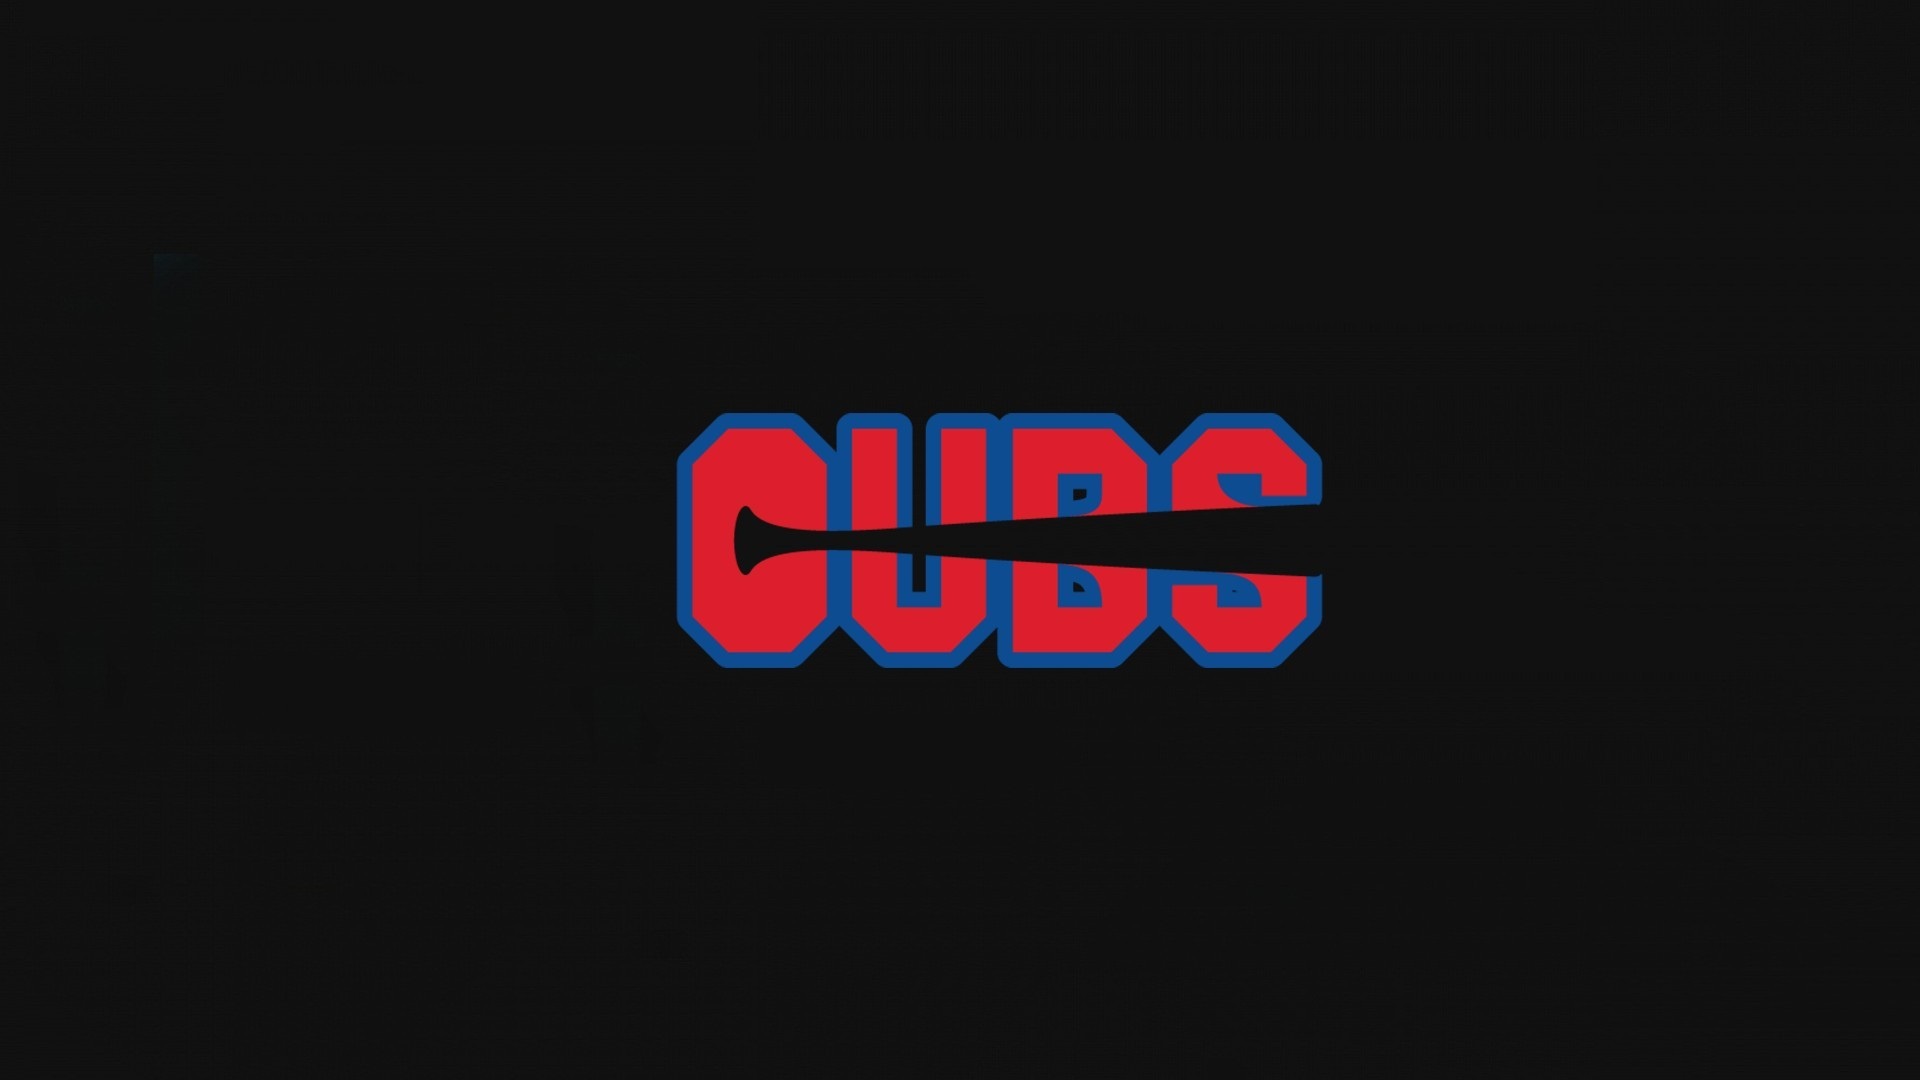 HD Backgrounds Chicago Cubs MLB With high-resolution 1920X1080 pixel. You can use this wallpaper for Mac Desktop Wallpaper, Laptop Screensavers, Android Wallpapers, Tablet or iPhone Home Screen and another mobile phone device